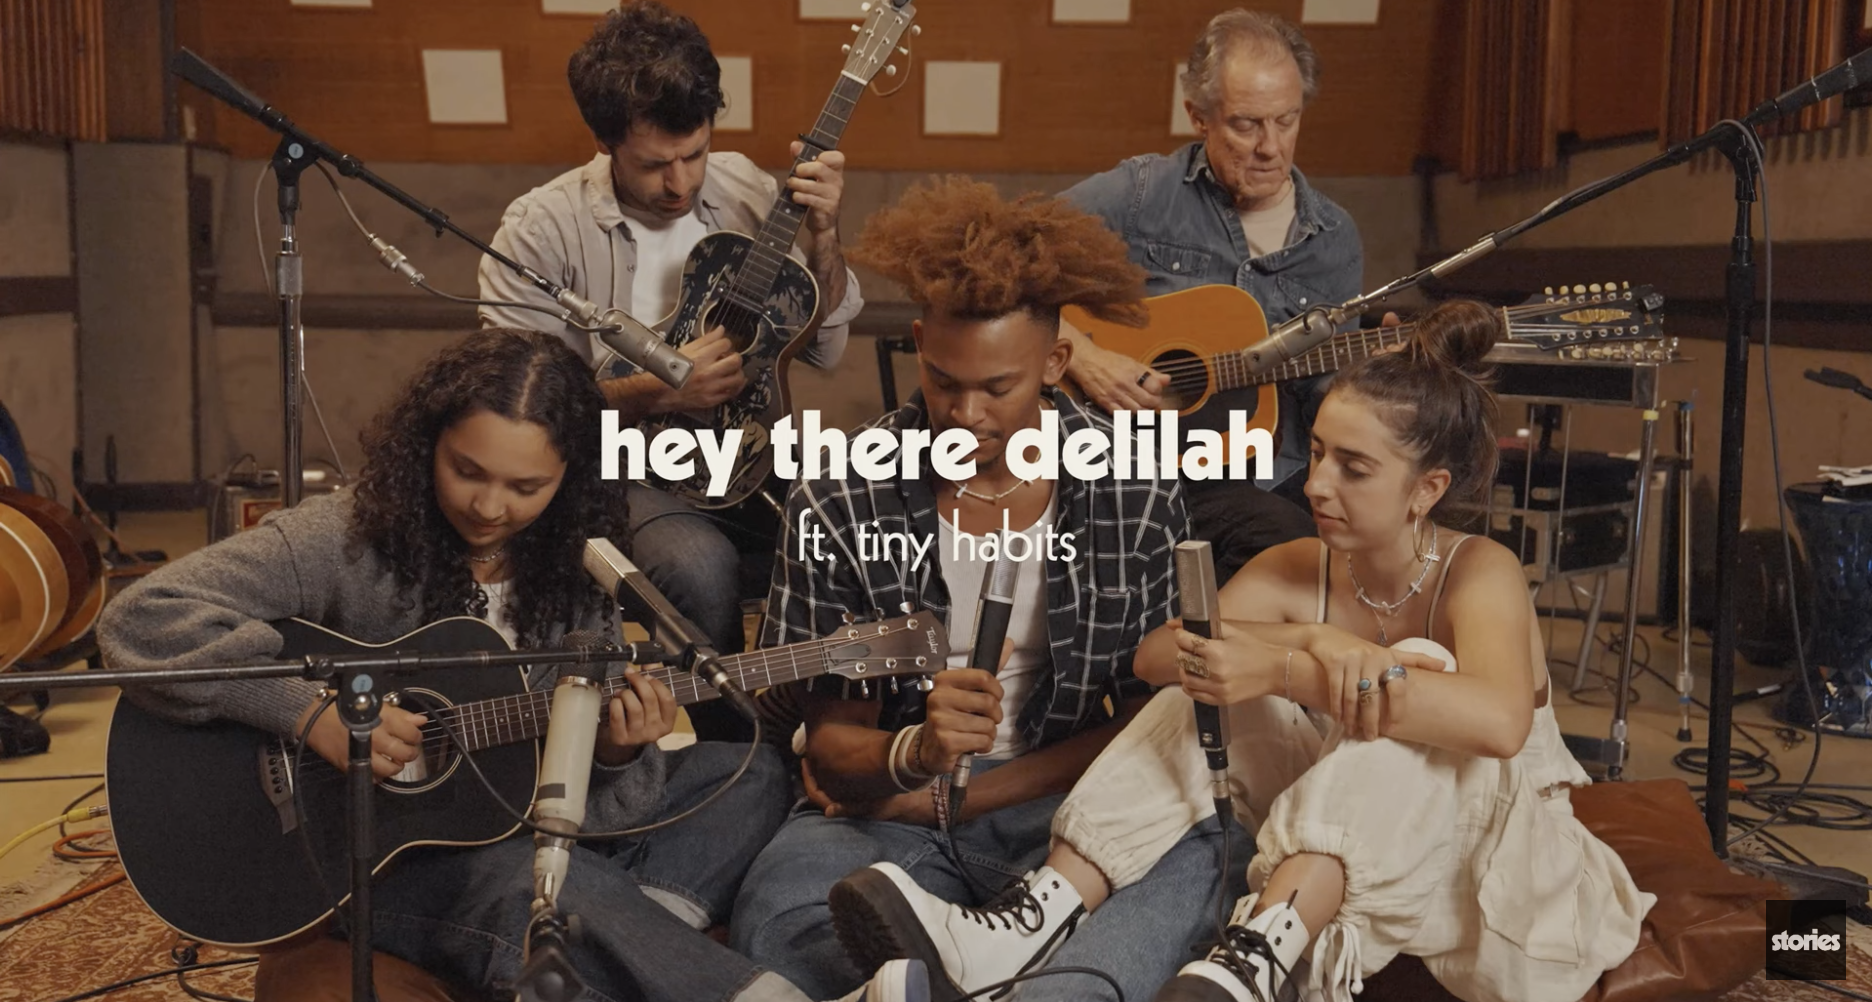 Hey There Delilah – Plain White T’s (stripped-down cover ft. Tiny Habits) | stories